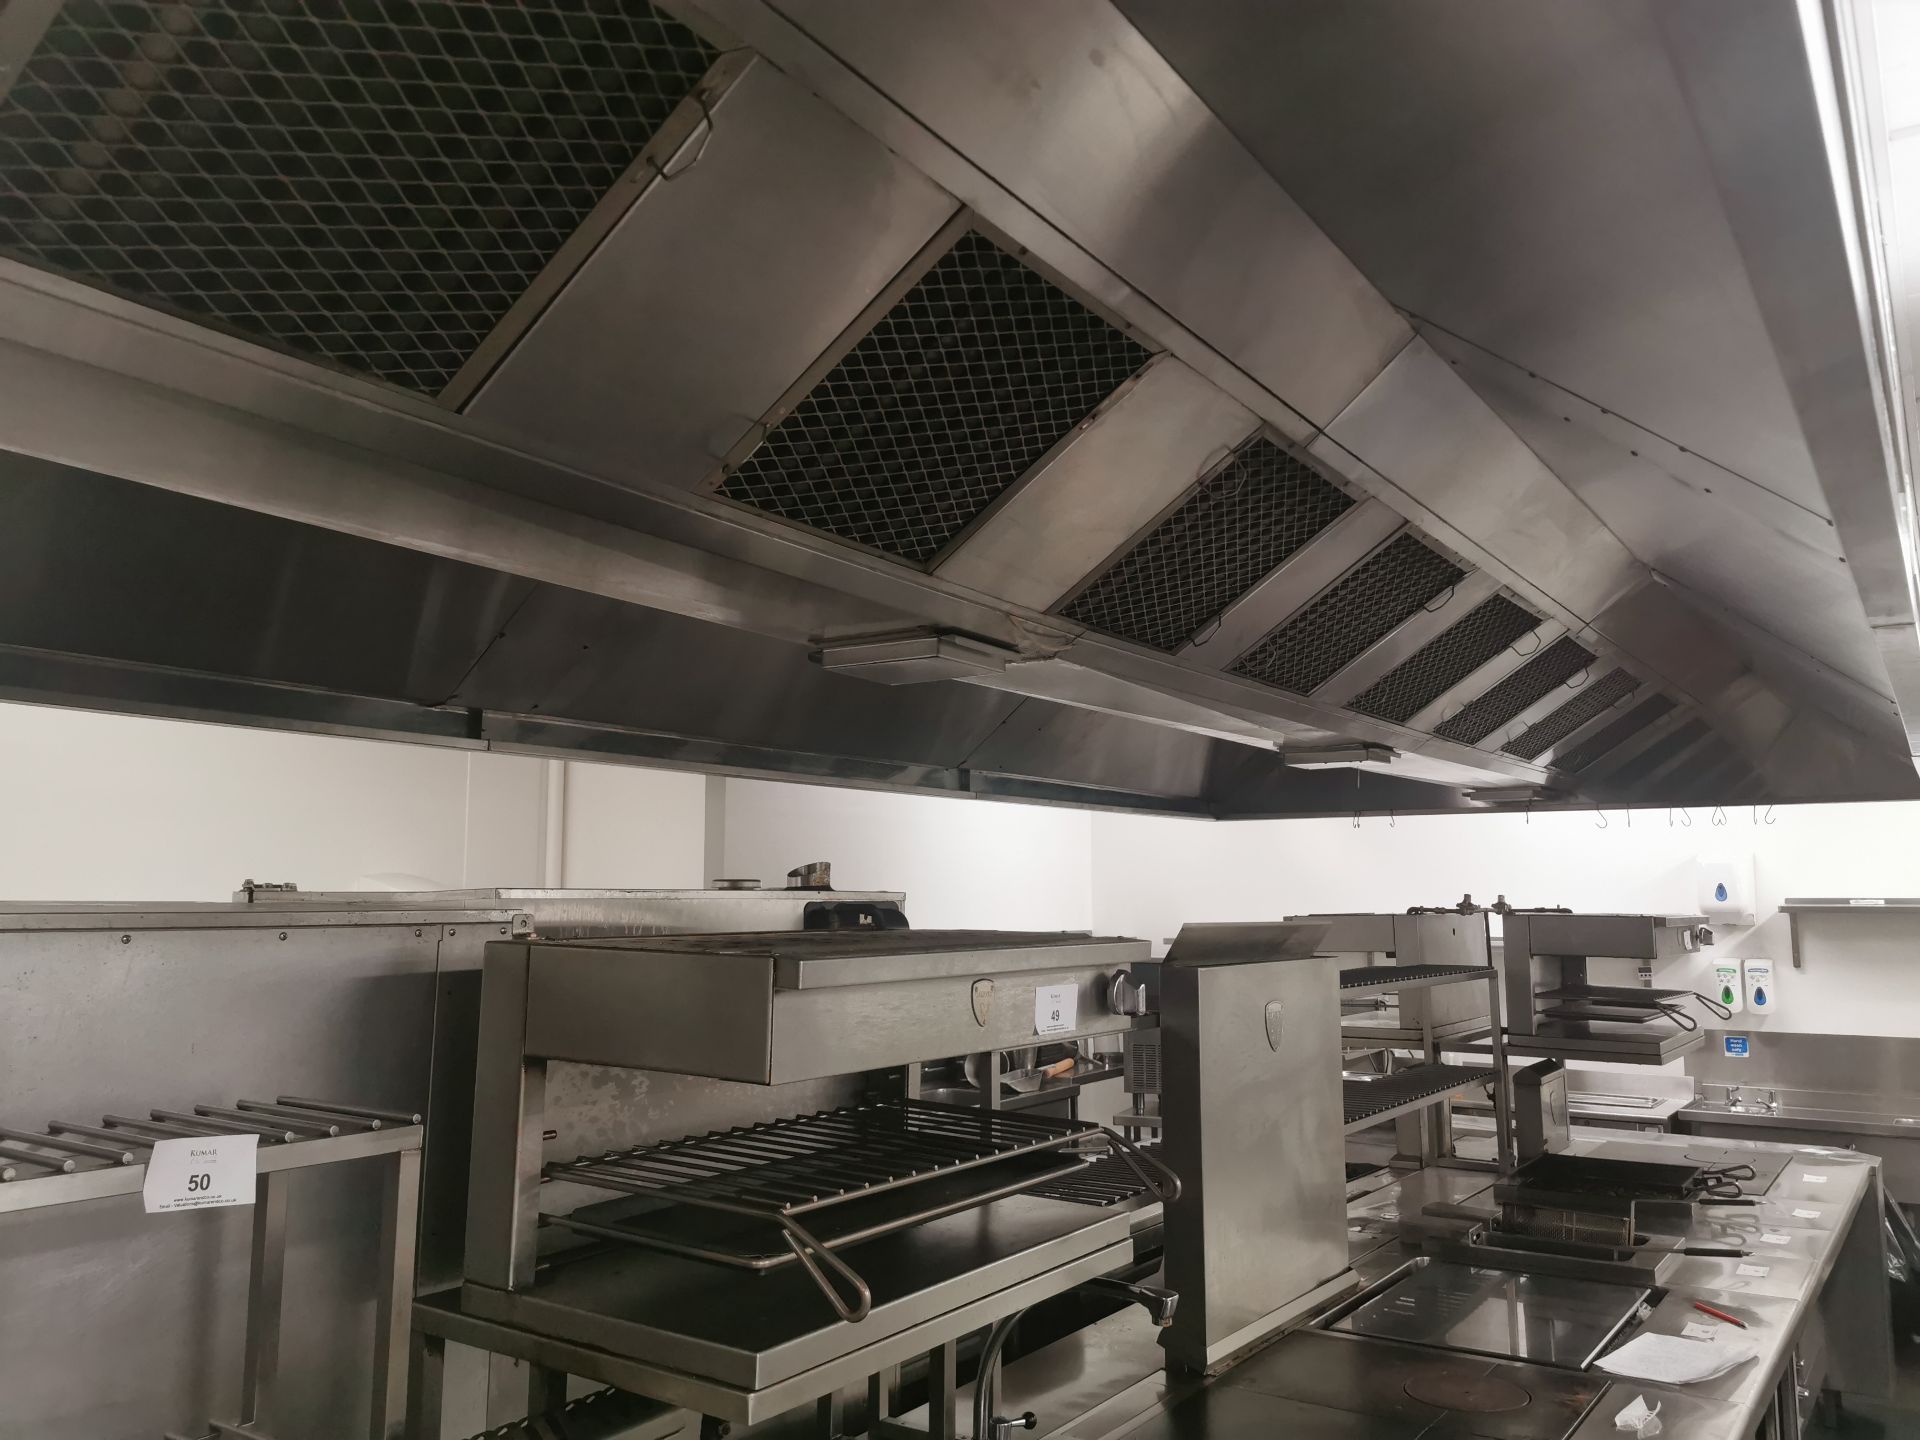 Commercial stainless steel extractor canopy hood, - Image 4 of 5